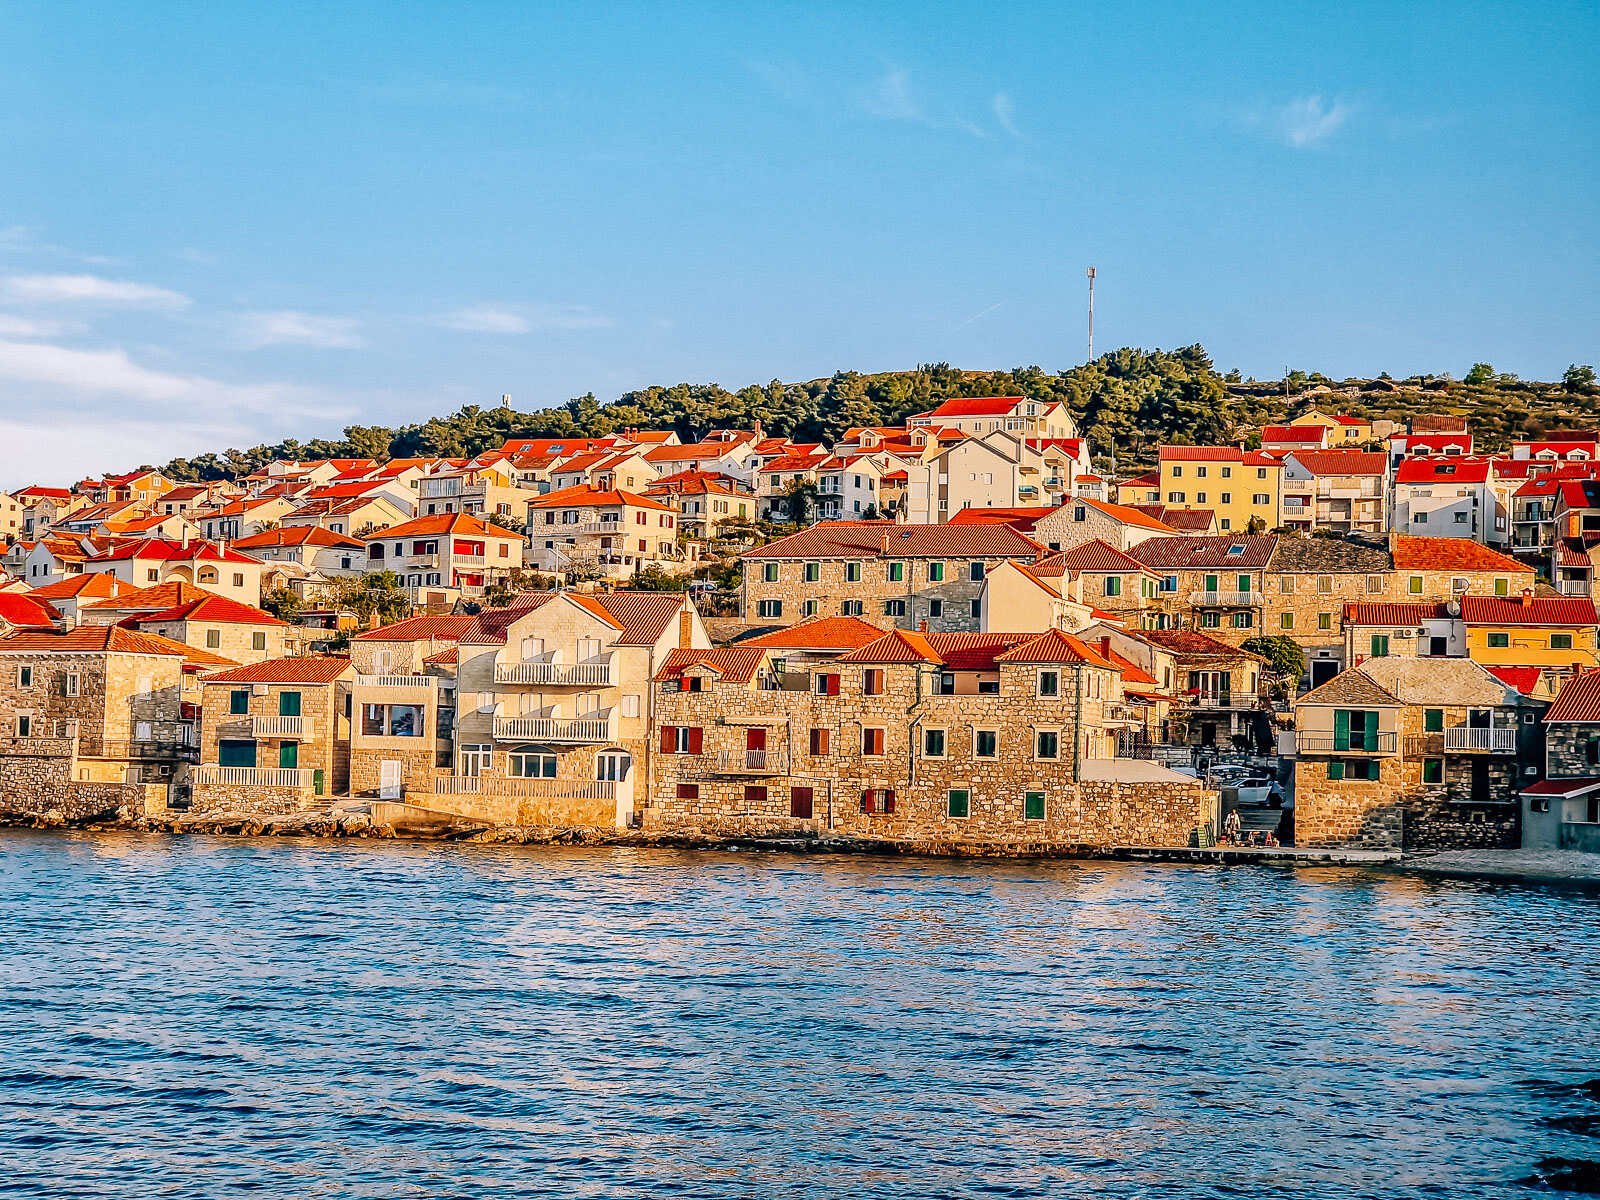 Croatian stone houses with orange roofs on the edge of the sea at sunset